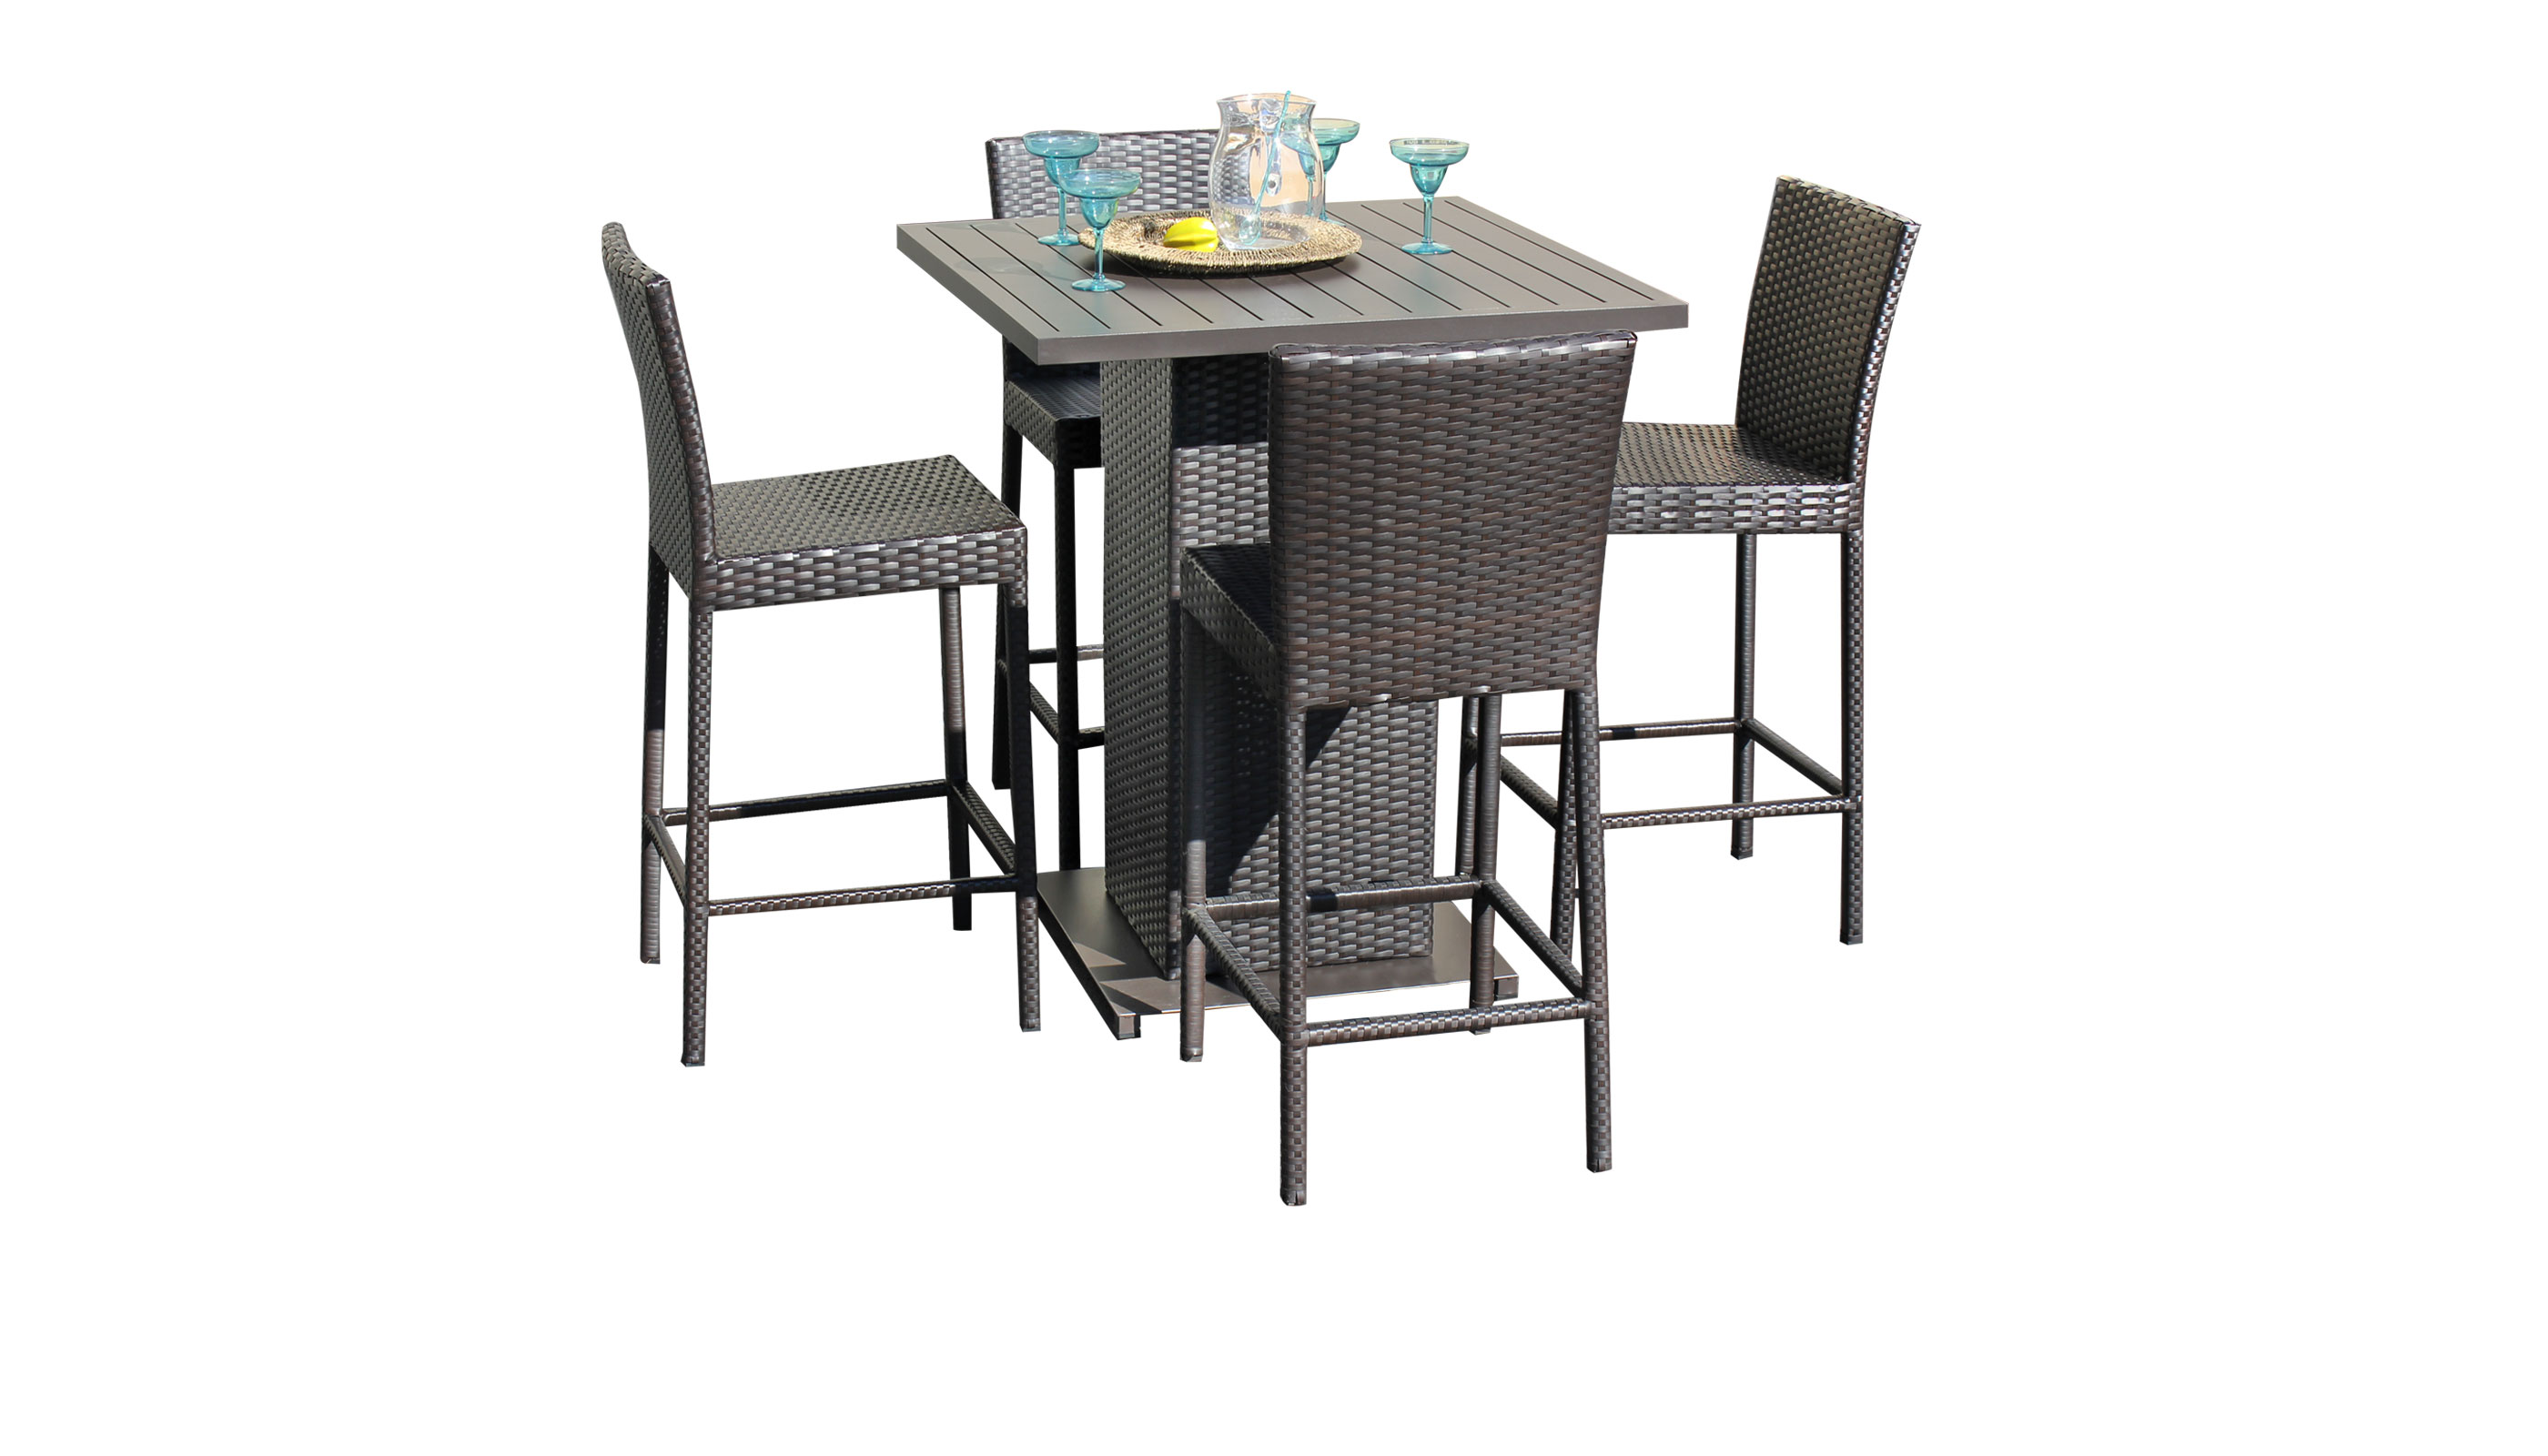 Barbados Pub Table Set With Barstools 5 Piece Outdoor Wicker Patio Furniture - TK Classics